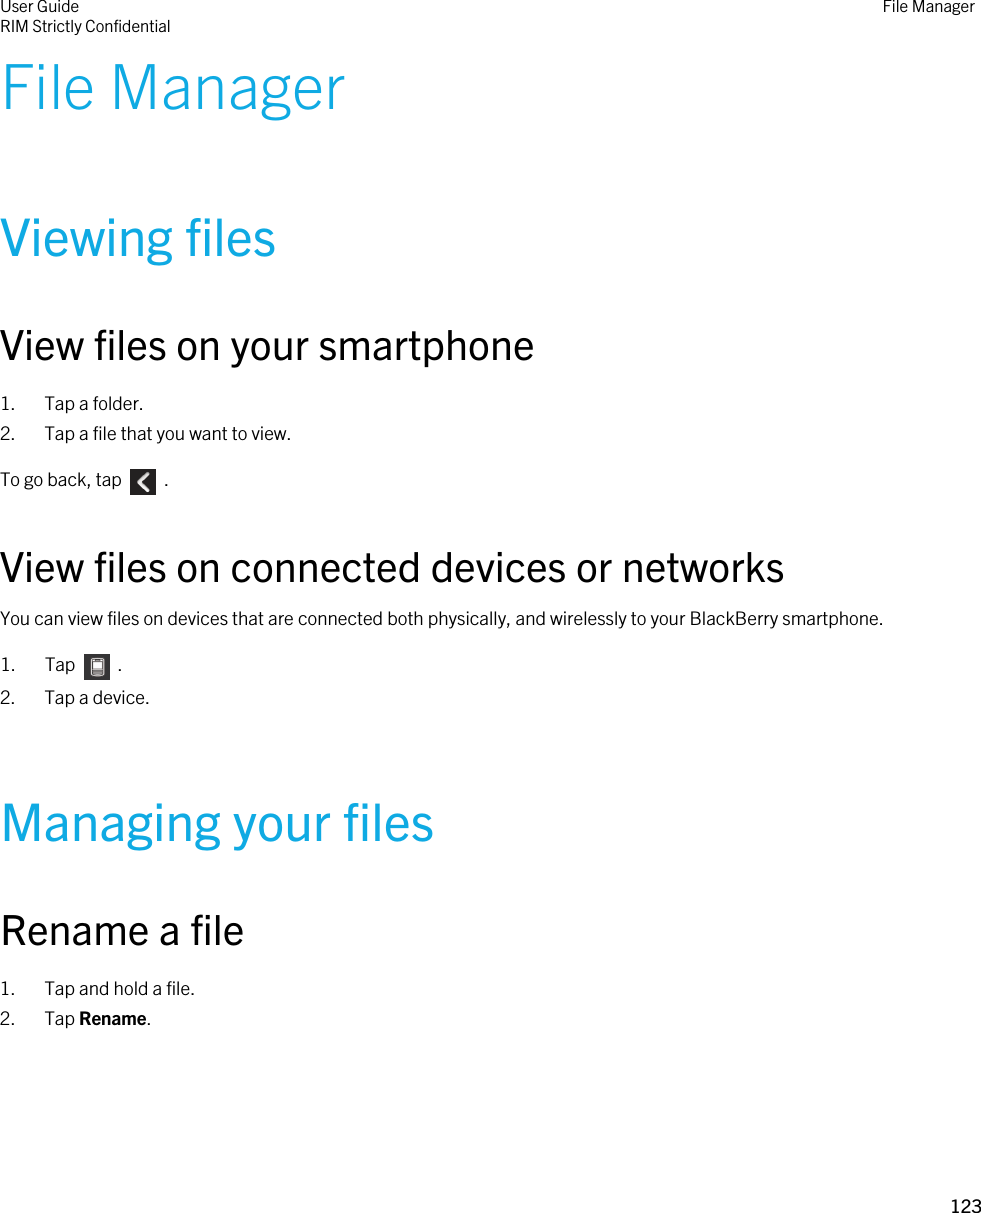 File ManagerViewing filesView files on your smartphone1. Tap a folder.2. Tap a file that you want to view.To go back, tap    .View files on connected devices or networksYou can view files on devices that are connected both physically, and wirelessly to your BlackBerry smartphone.1.  Tap    .2. Tap a device.Managing your filesRename a file1. Tap and hold a file.2. Tap Rename.User GuideRIM Strictly Confidential File Manager123 